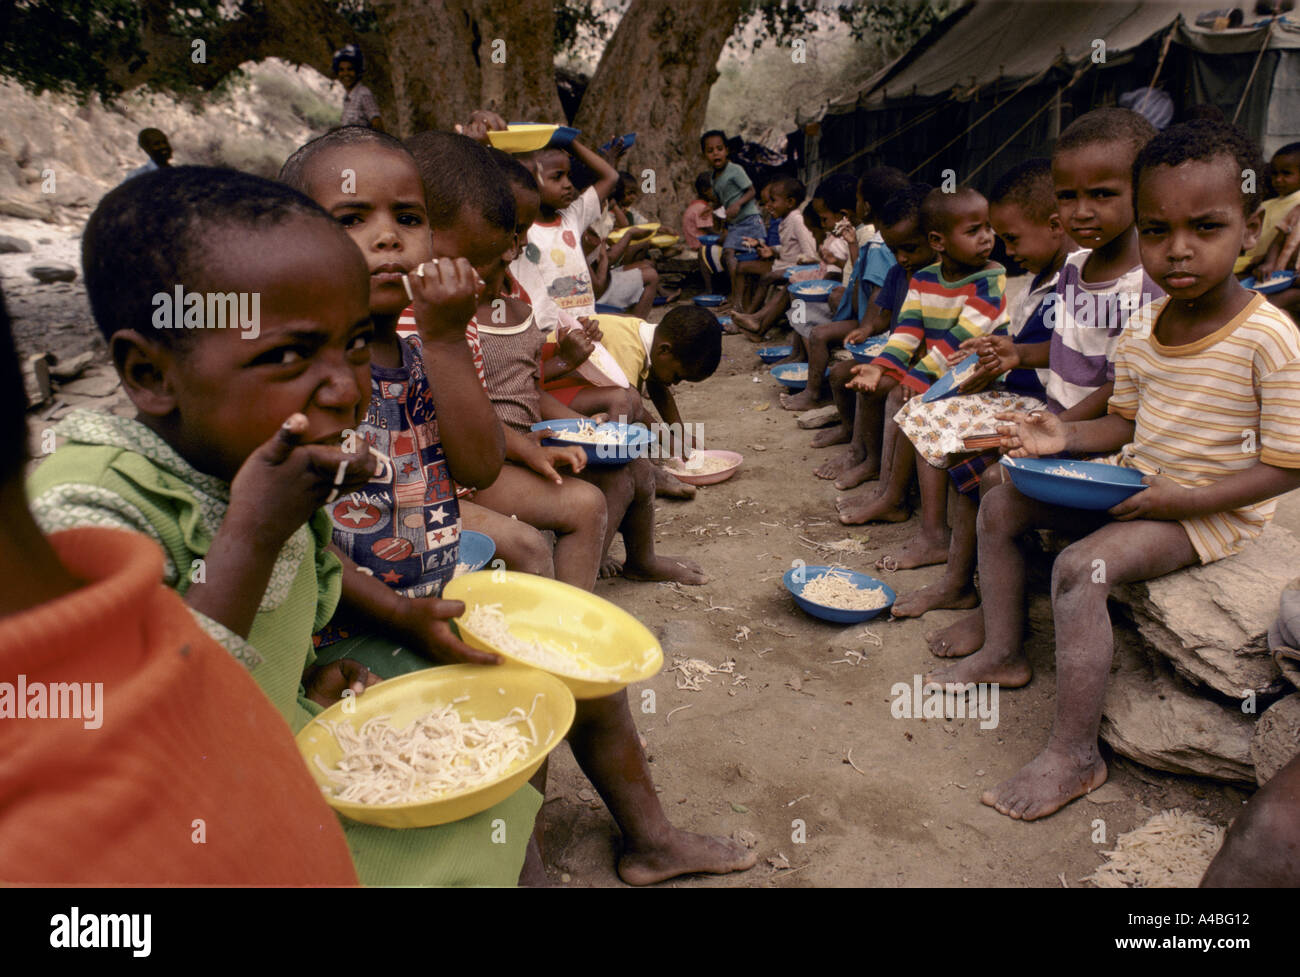 Eritrea: war orphans and children of EPLF fighters eat their mid-day meal at a school in the EPLF's base area in severe drought. Stock Photo